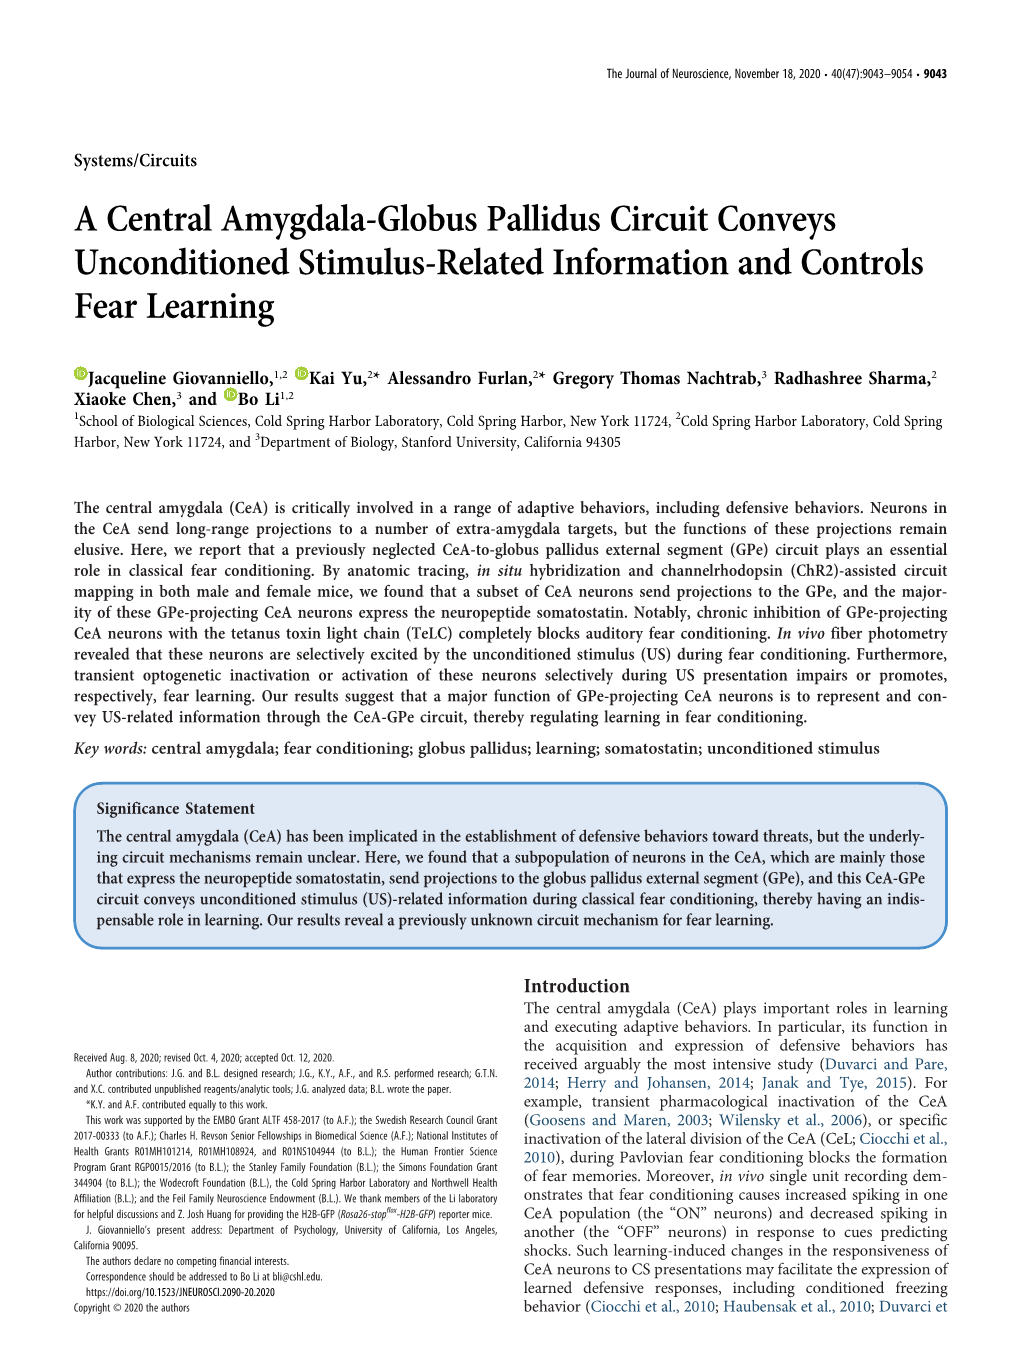 A Central Amygdala-Globus Pallidus Circuit Conveys Unconditioned Stimulus-Related Information and Controls Fear Learning